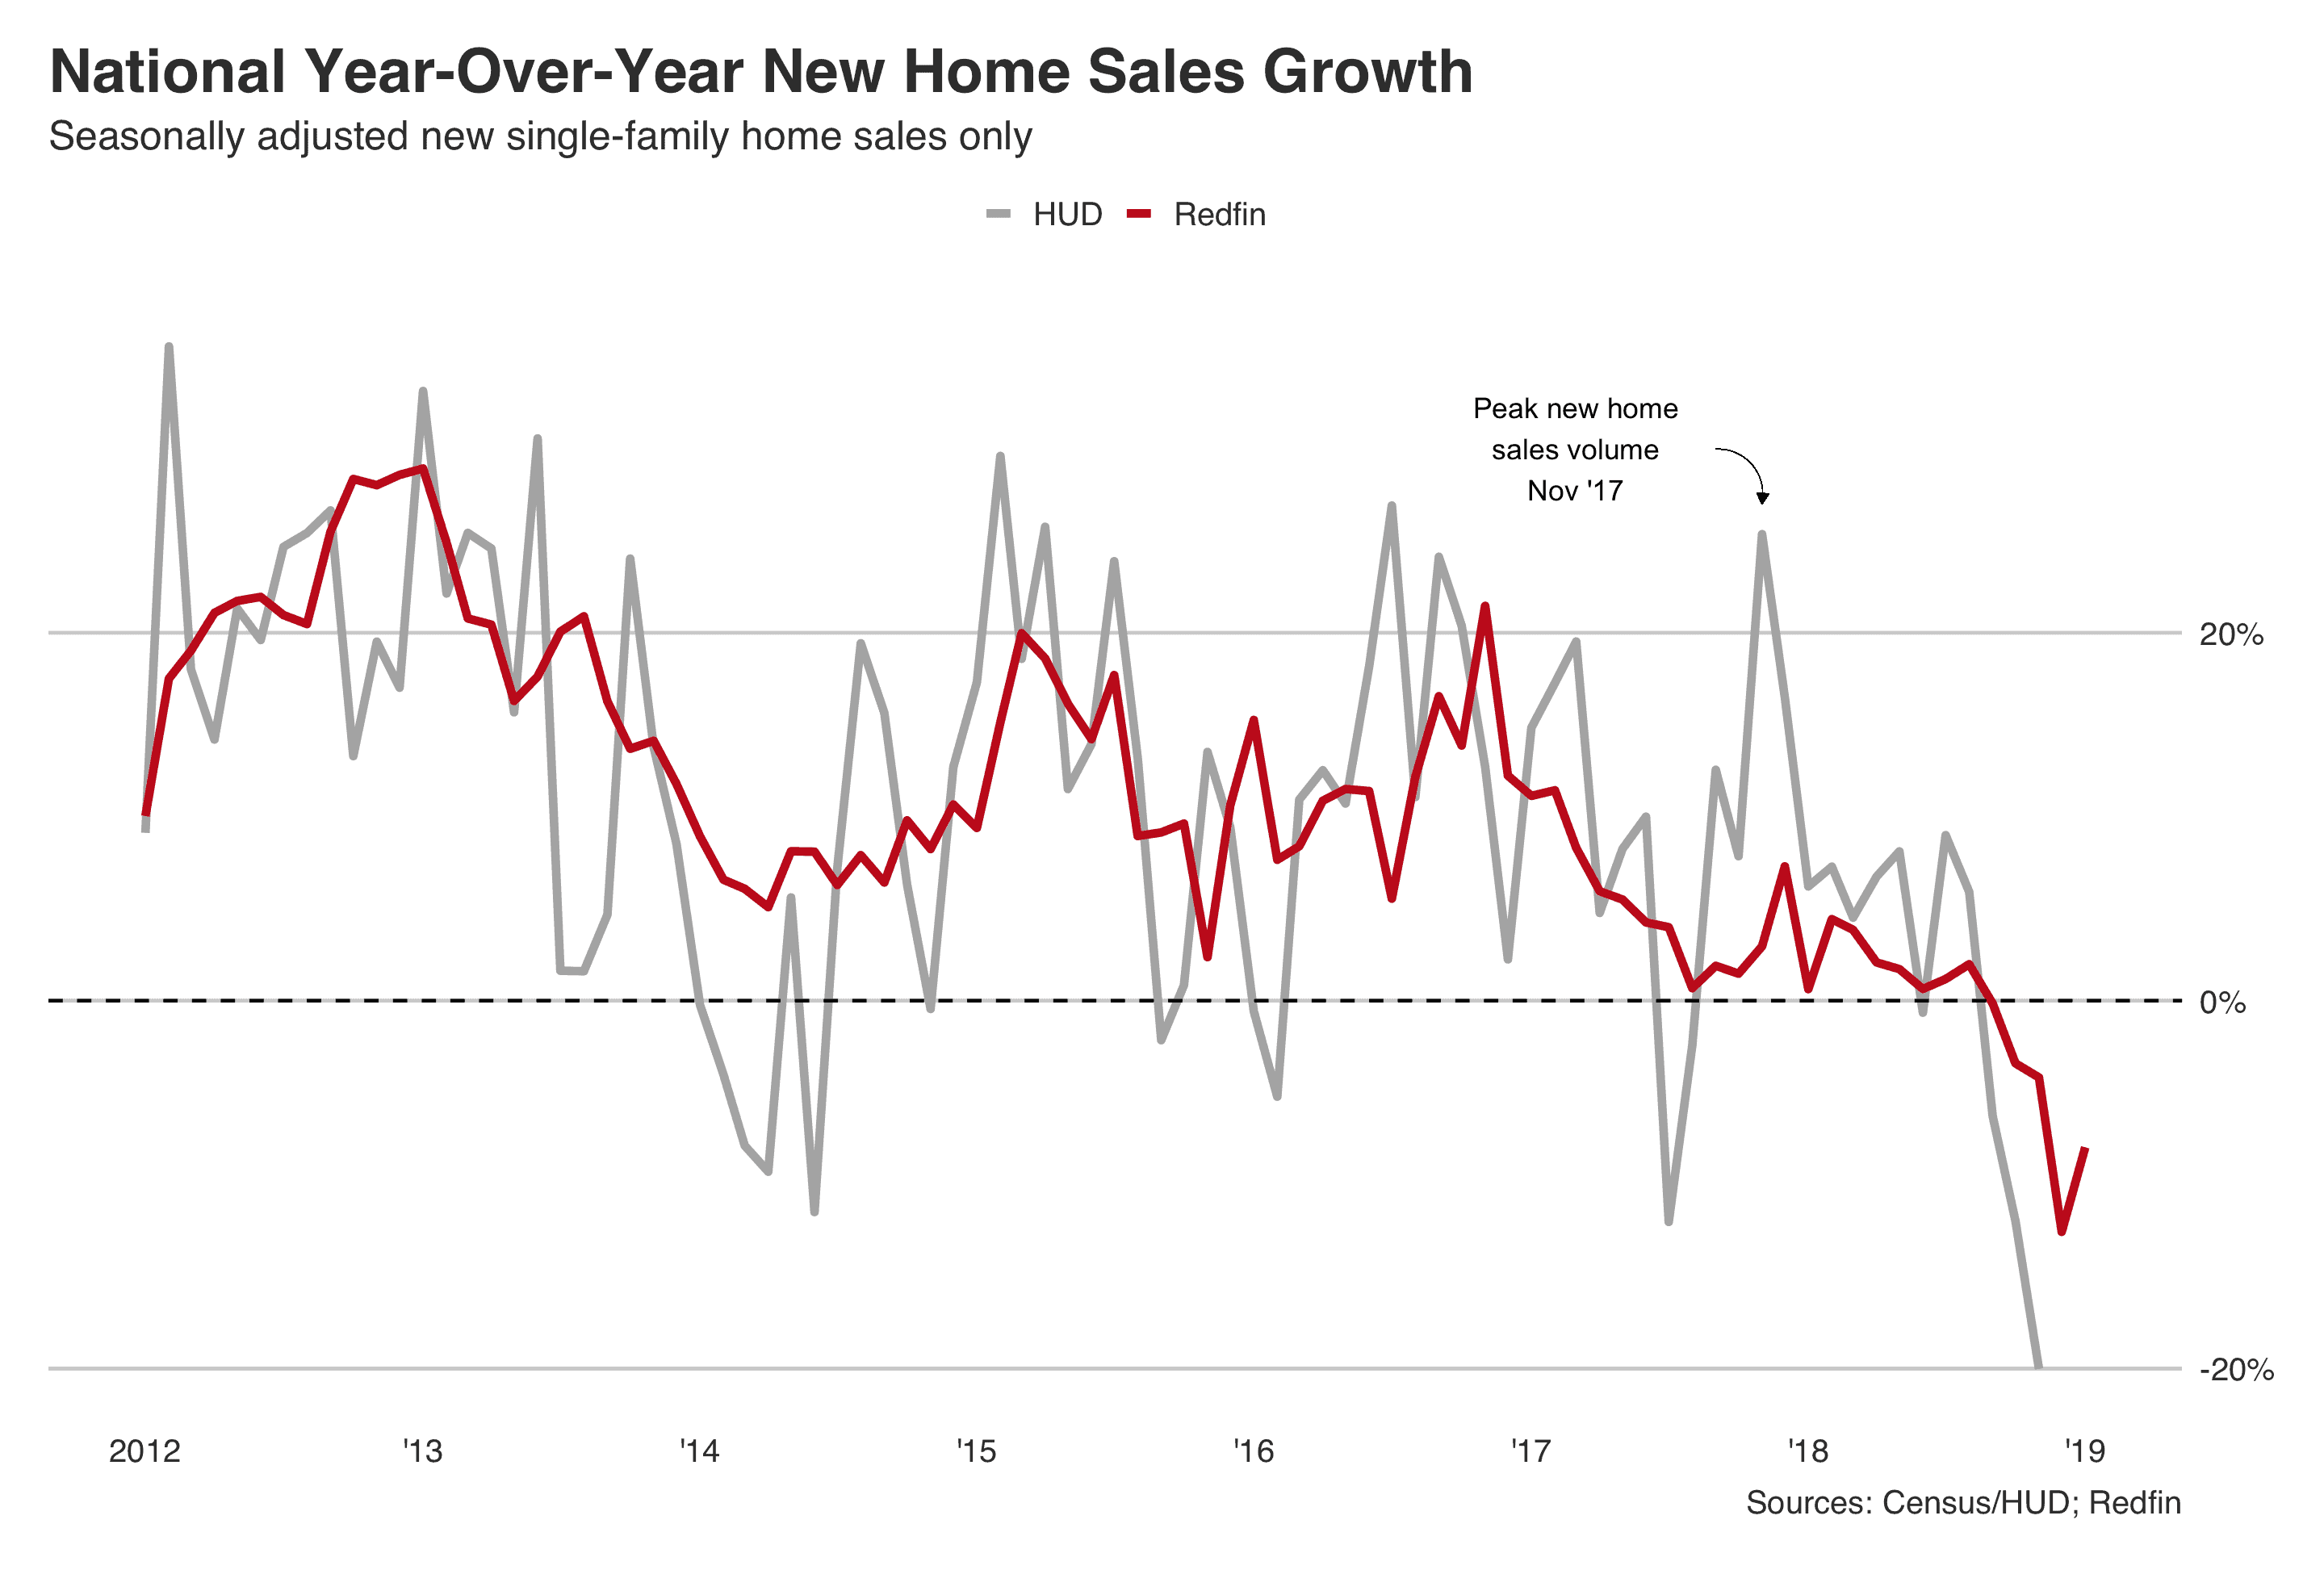 National new-home sales growth